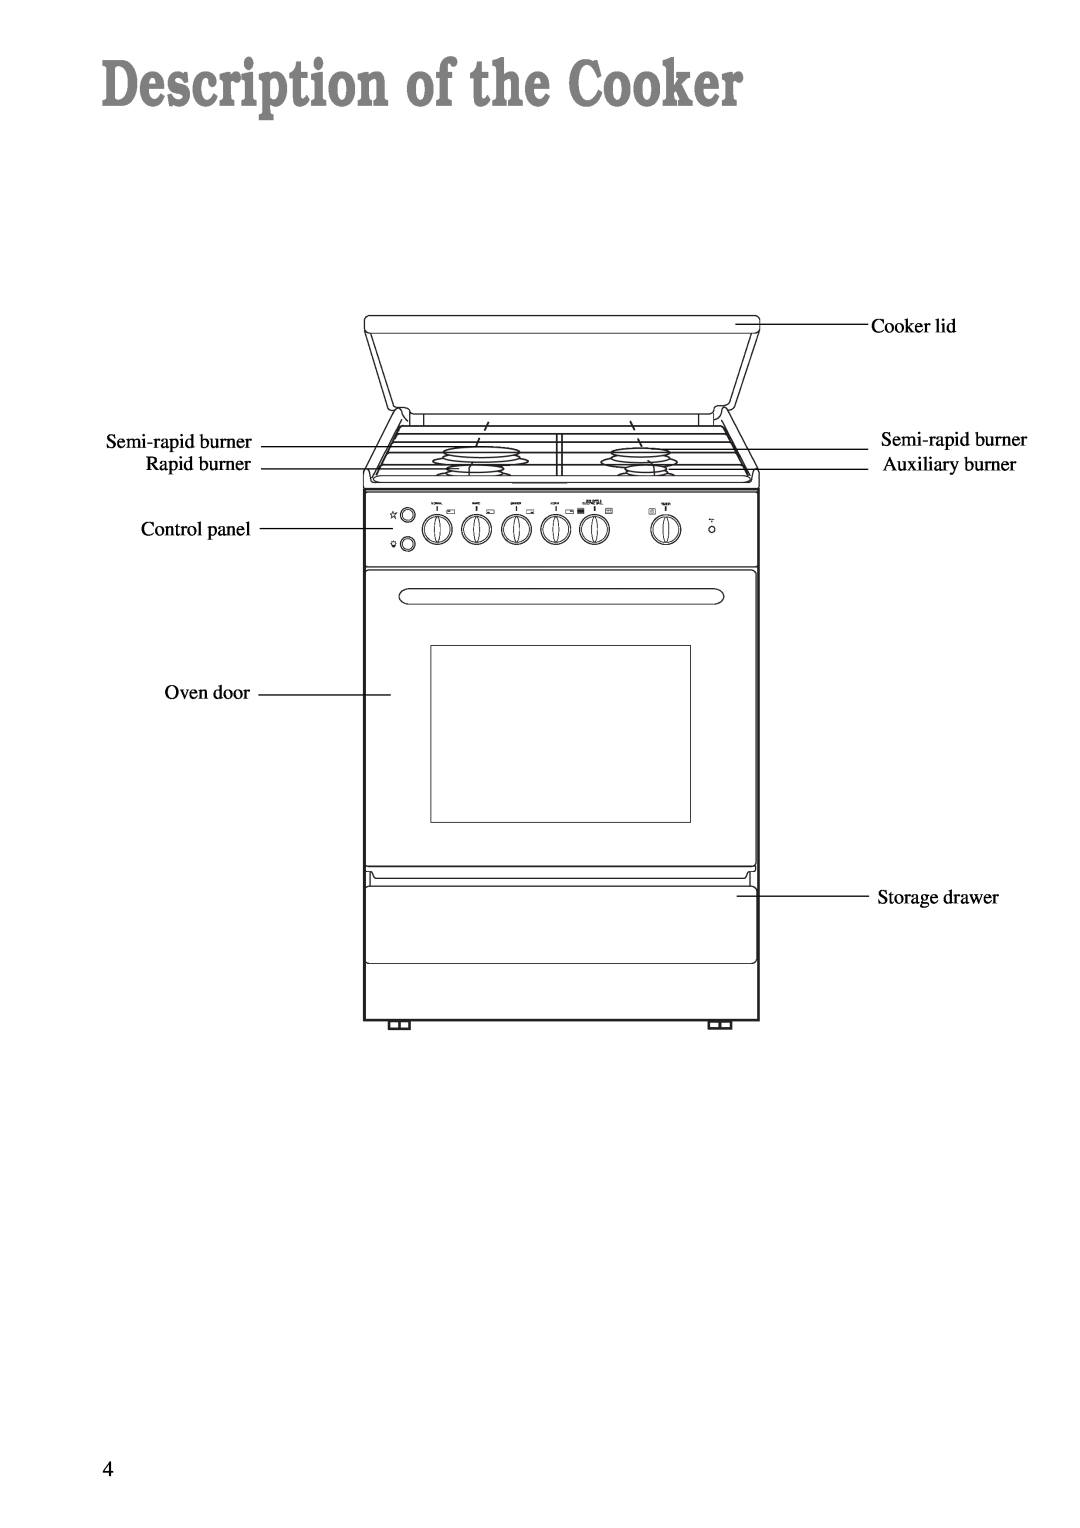 Electrolux CSIG 503 W manual Description of the Cooker, Normal, Rapid, Simmer, Gas Oven, Electric Grill, Timer 